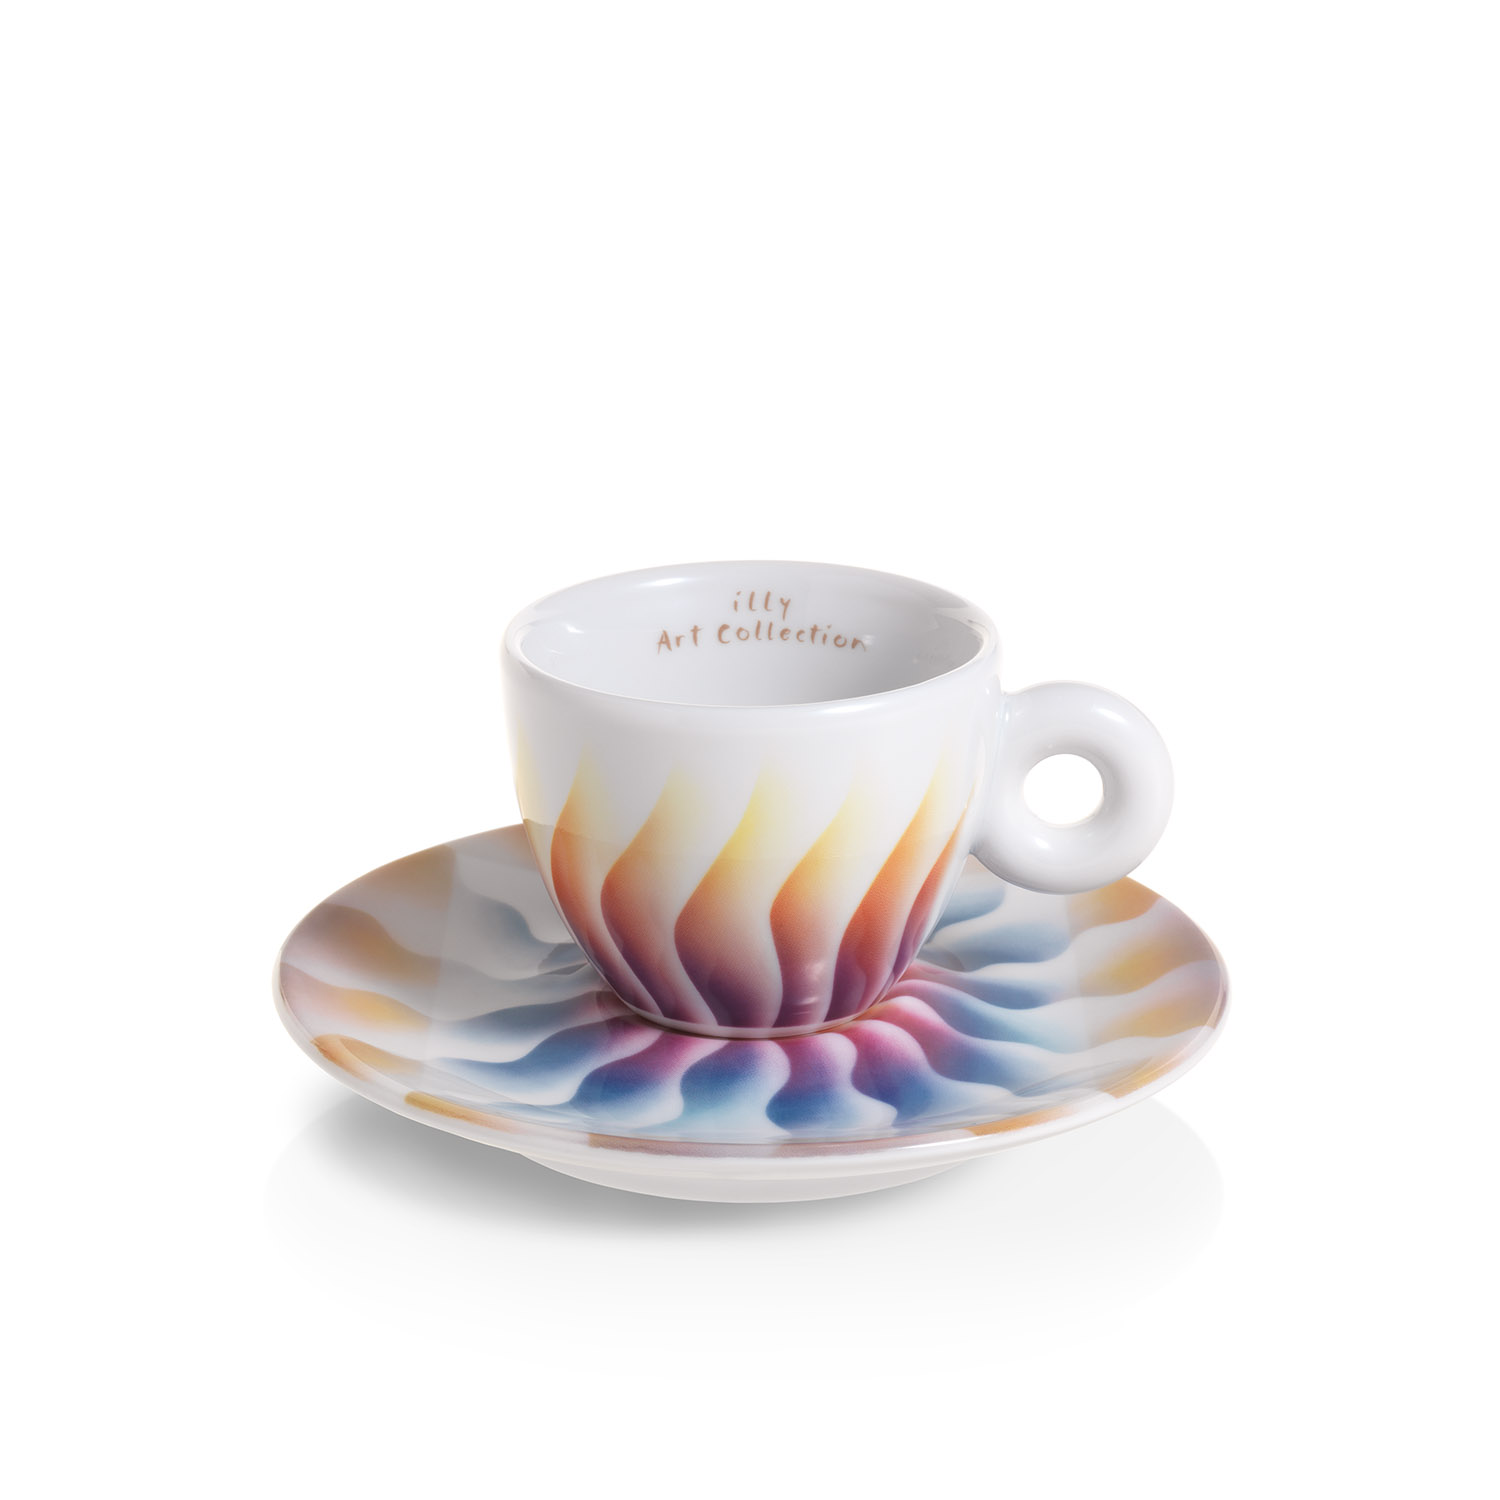 Set of 4 Espresso Cups - the Judy Chicago illy Art Collection